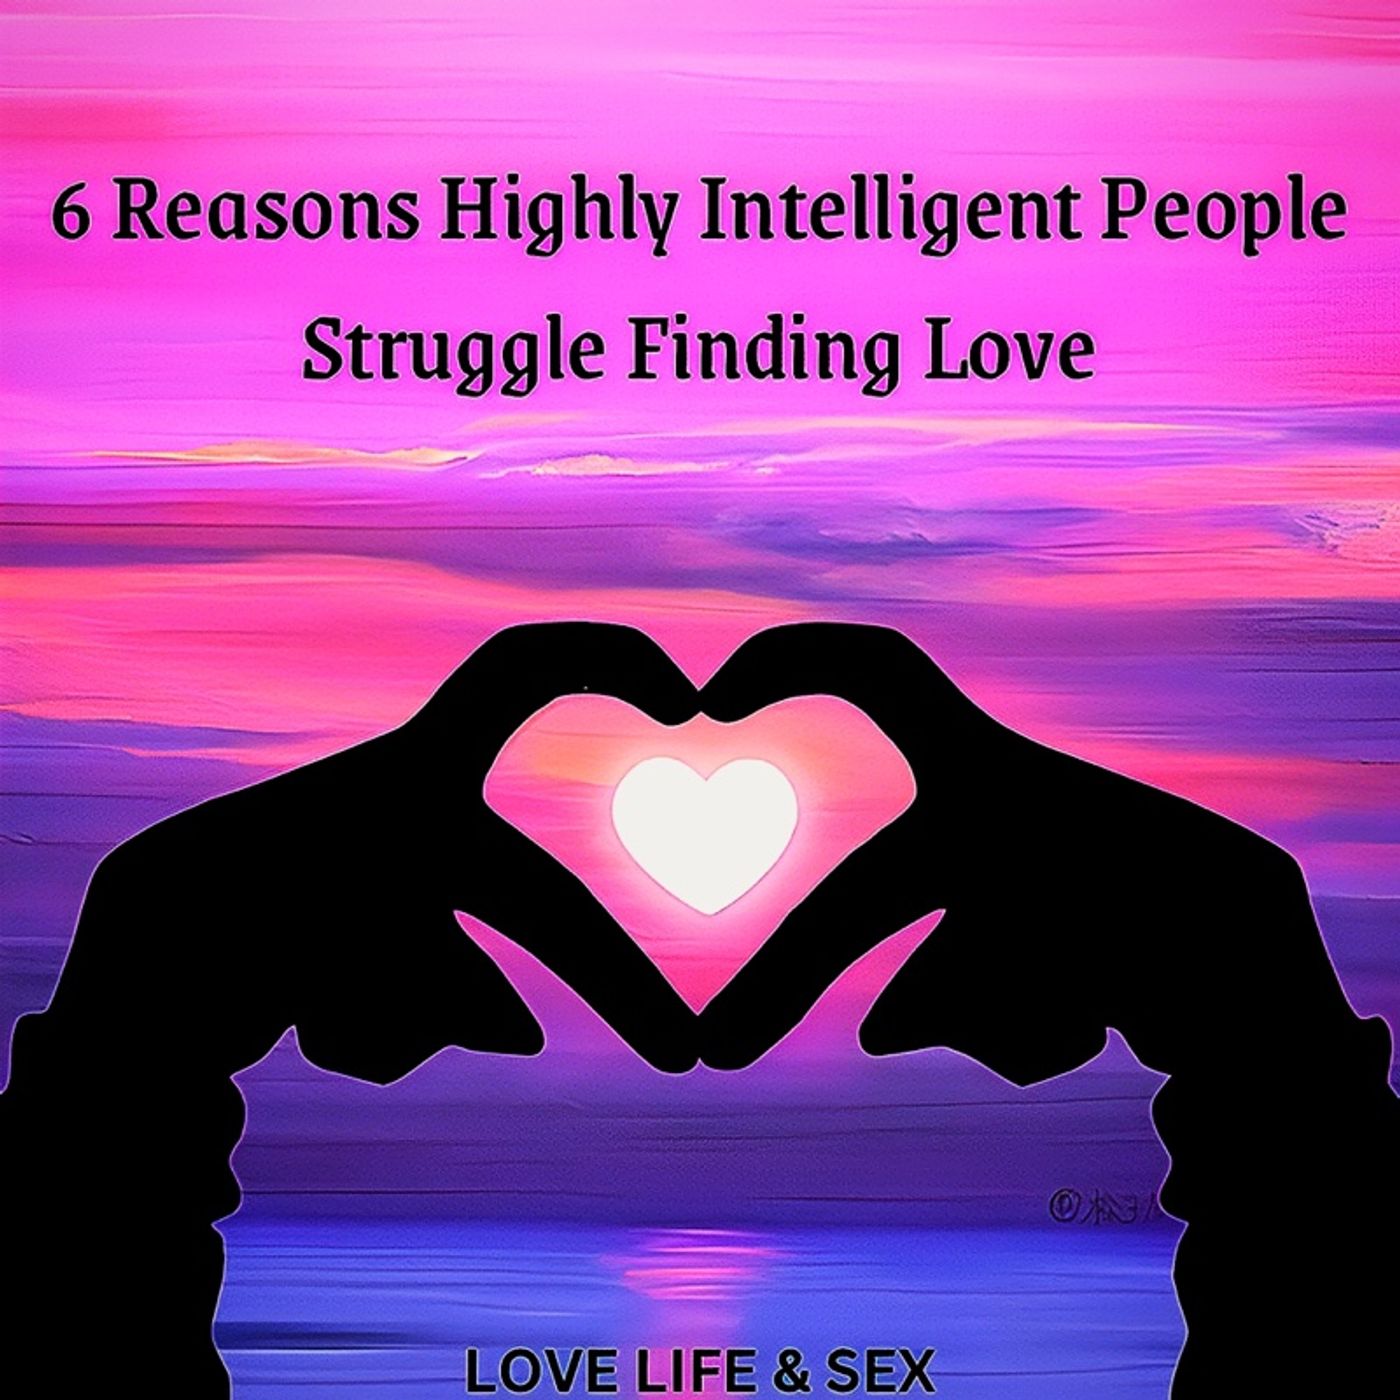 6 Reasons Highly Intelligent 🧠 People Struggle Finding Love ❤️